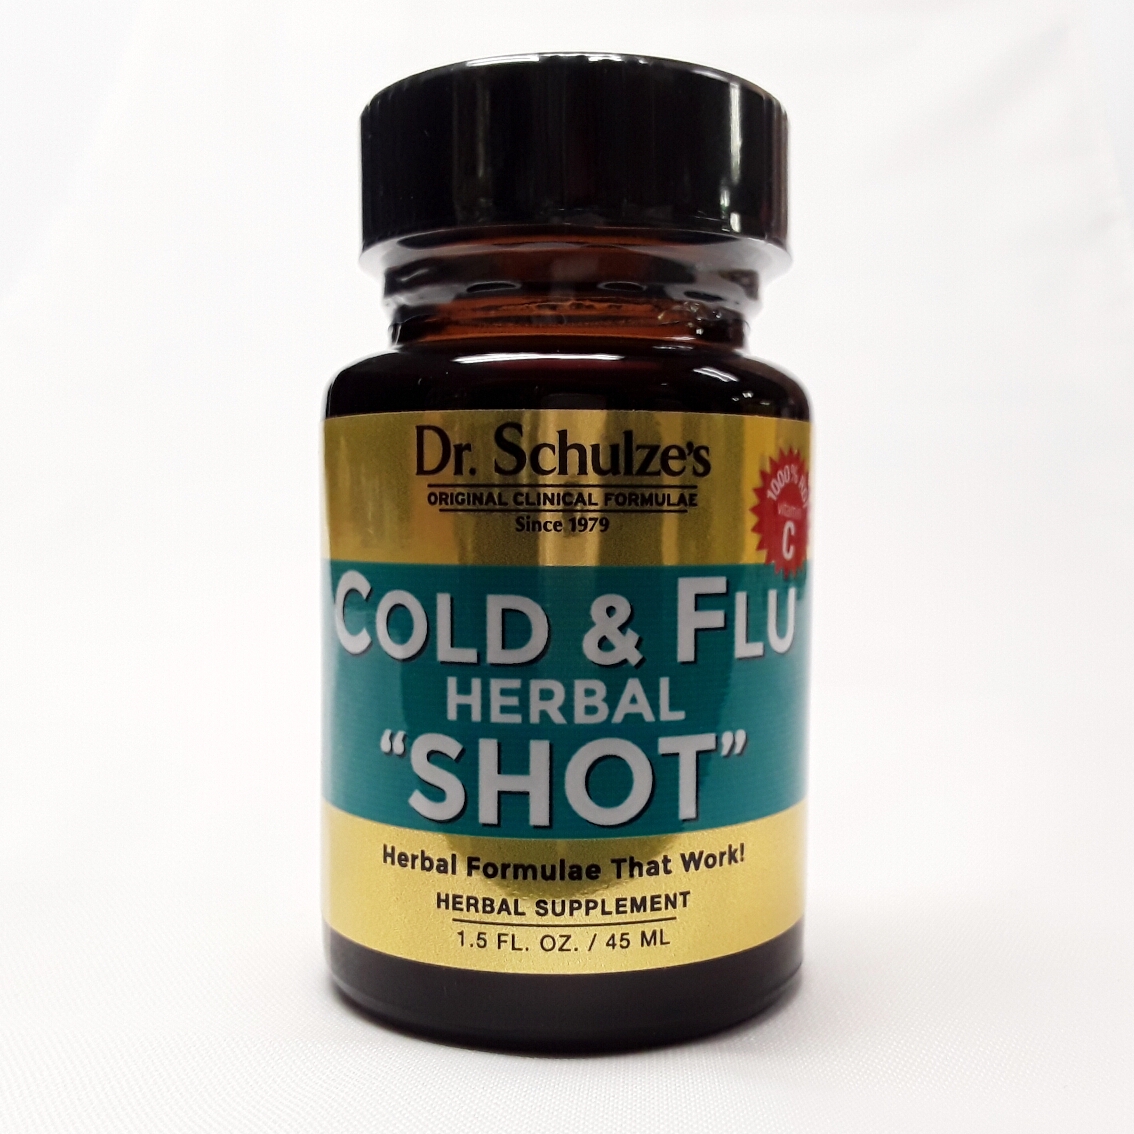 Dr Schulzes Cold and Flu Herbal Shot Website Product Image View 1